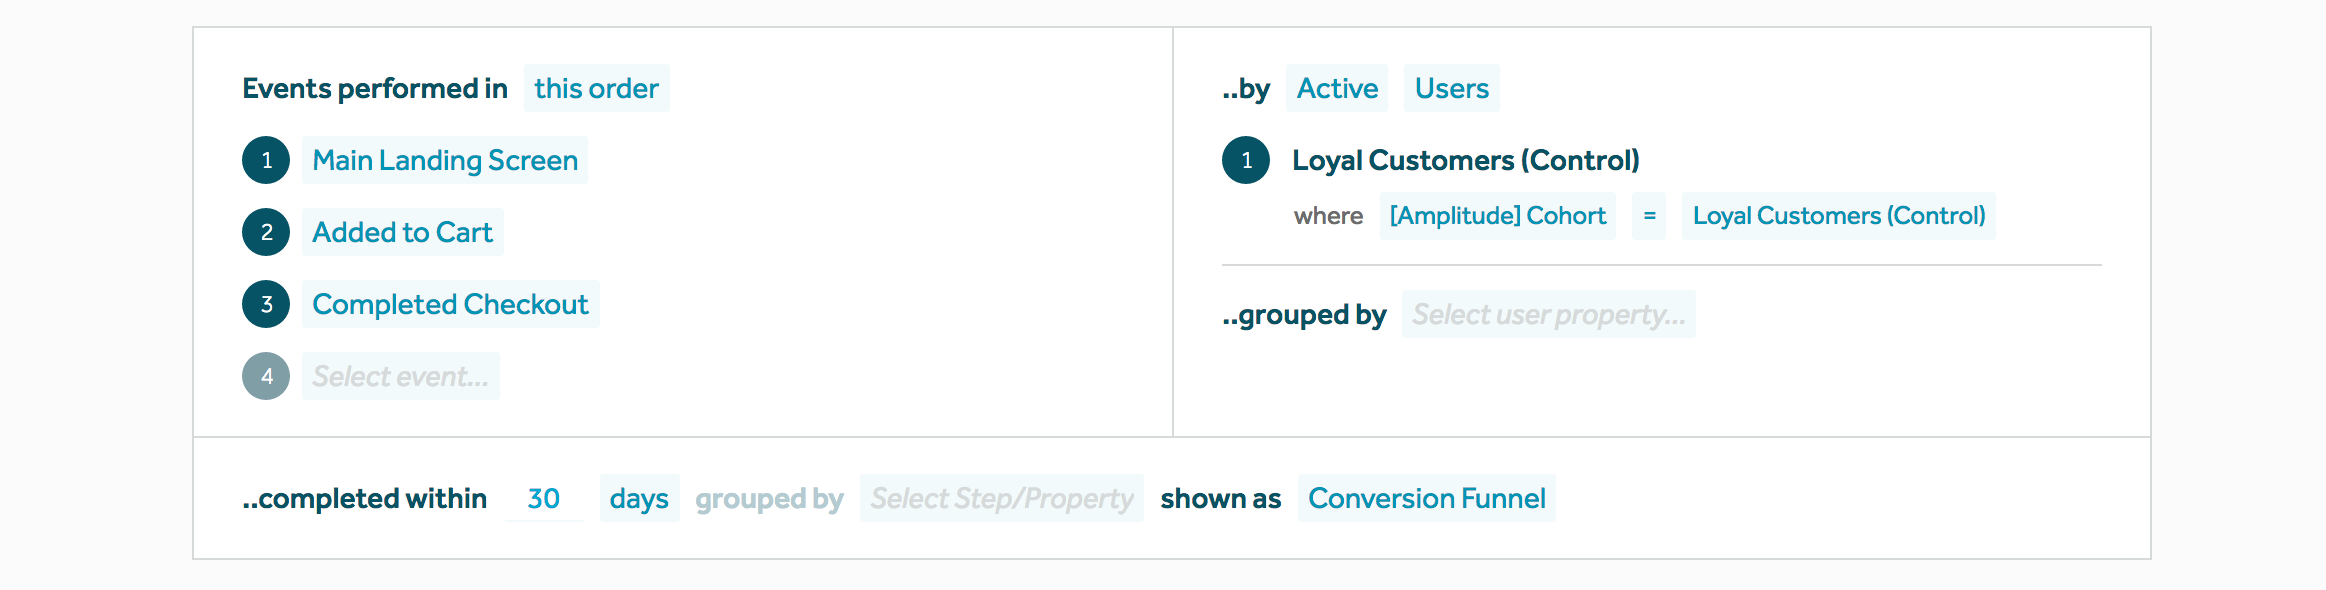 Screenshot of the Funnel Analysis page in Amplitude showing the Loyal Customers (Control) segment.